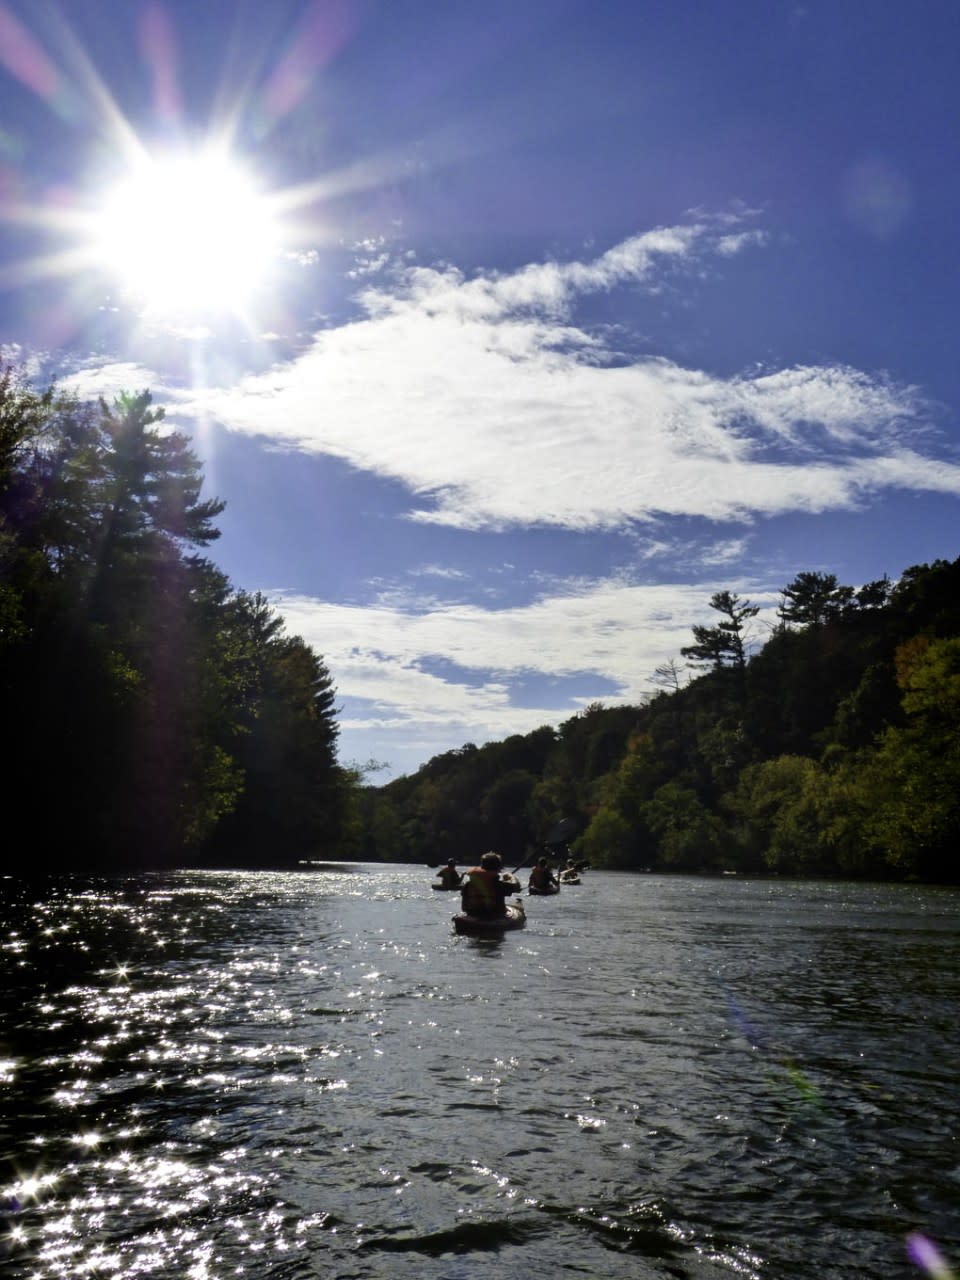 Kayaking Down the Eau Claire River - By: Kaitlyn Bryan/Volume One